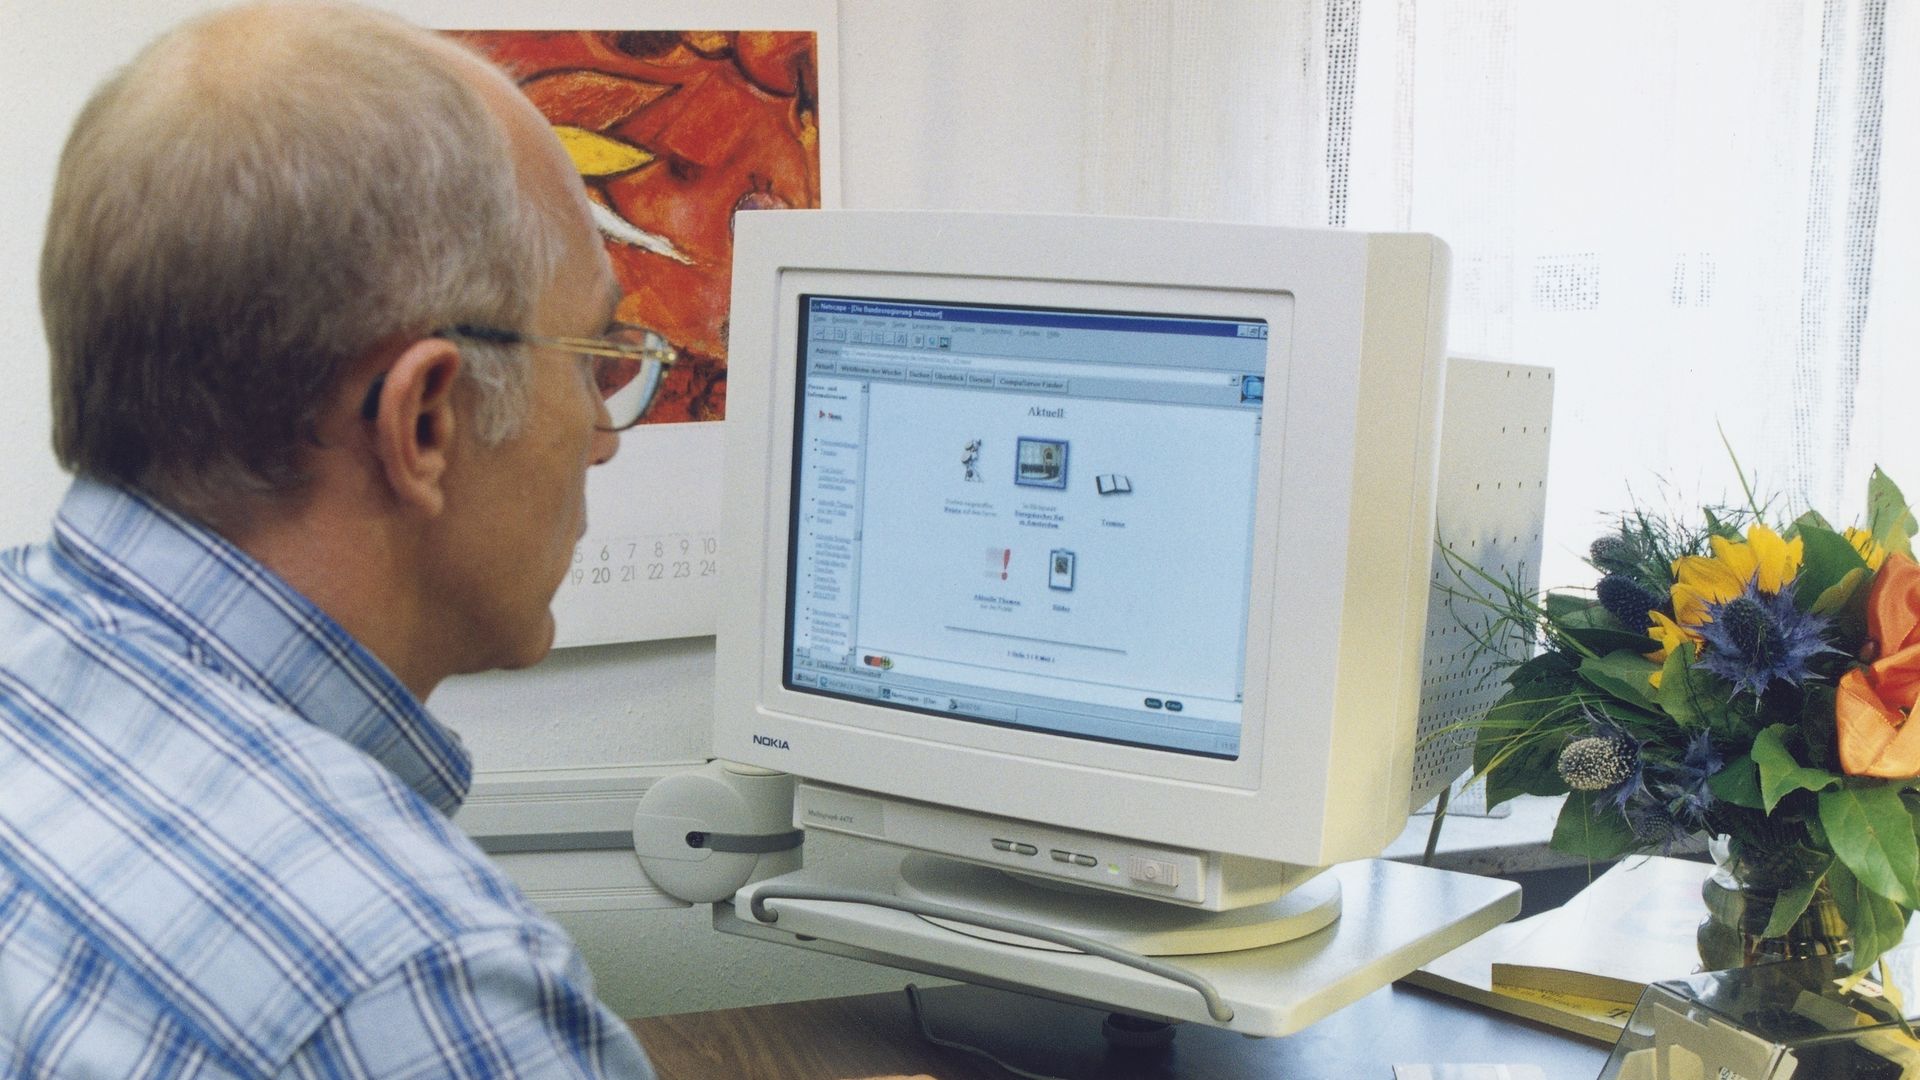 A man uses an old computer